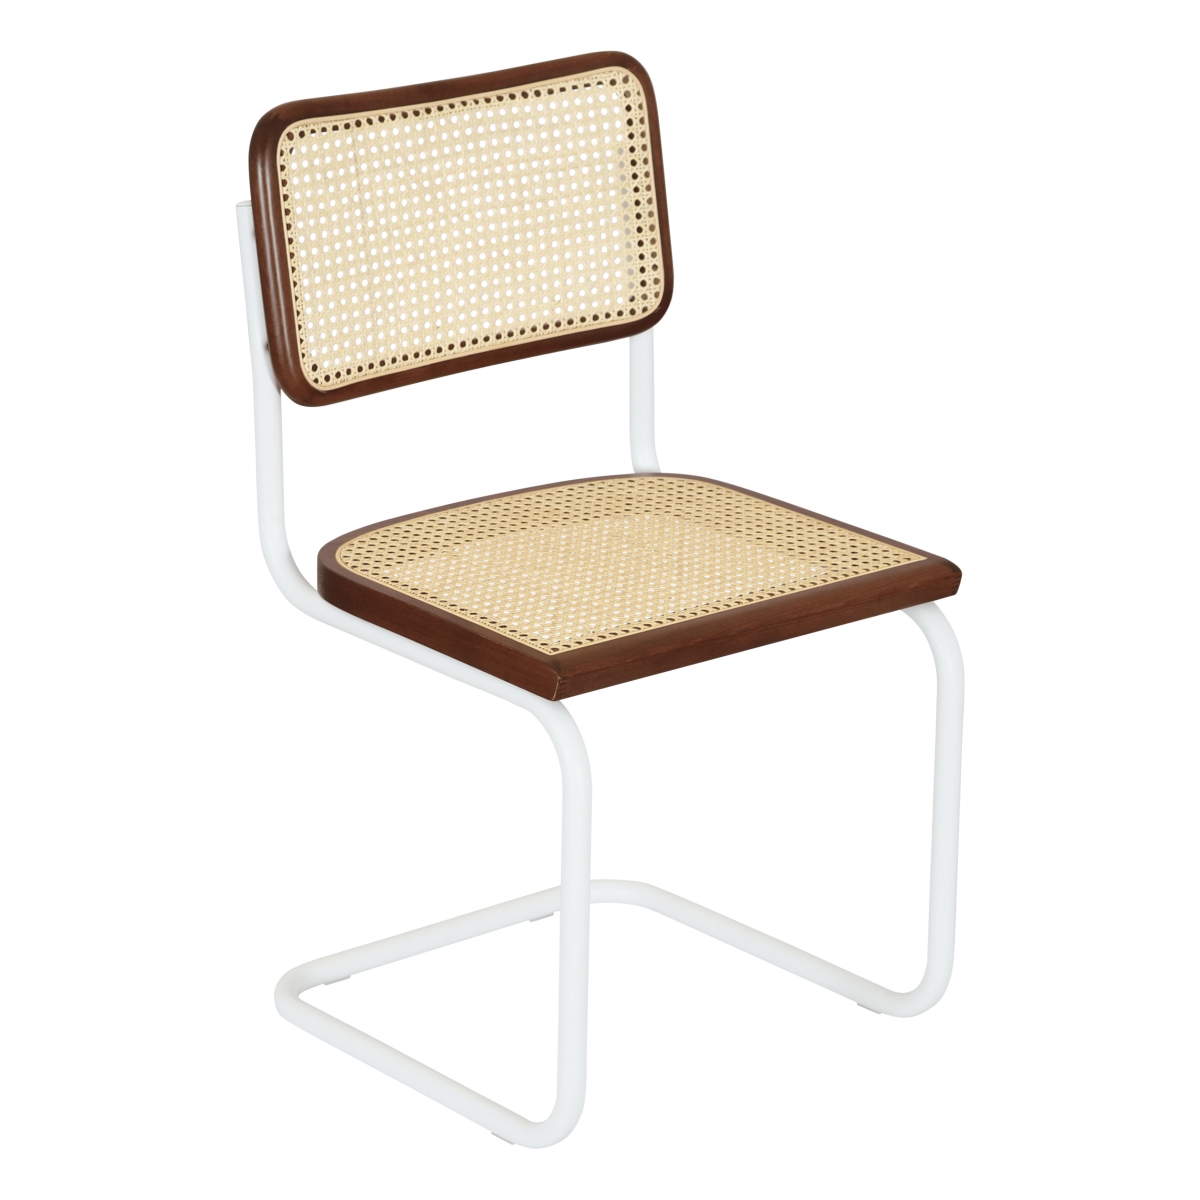 Picture of Breuer Chair Company UNB-BCC-CSCA-SC-WHTF-WLNTW-NTRLC Marcel Breuer B32 Cesca Cane Cantilever Side Chair w/ White Steel Frame Walnut Wood &amp; Natural Cane (Made in Italy) by Furnish Theory